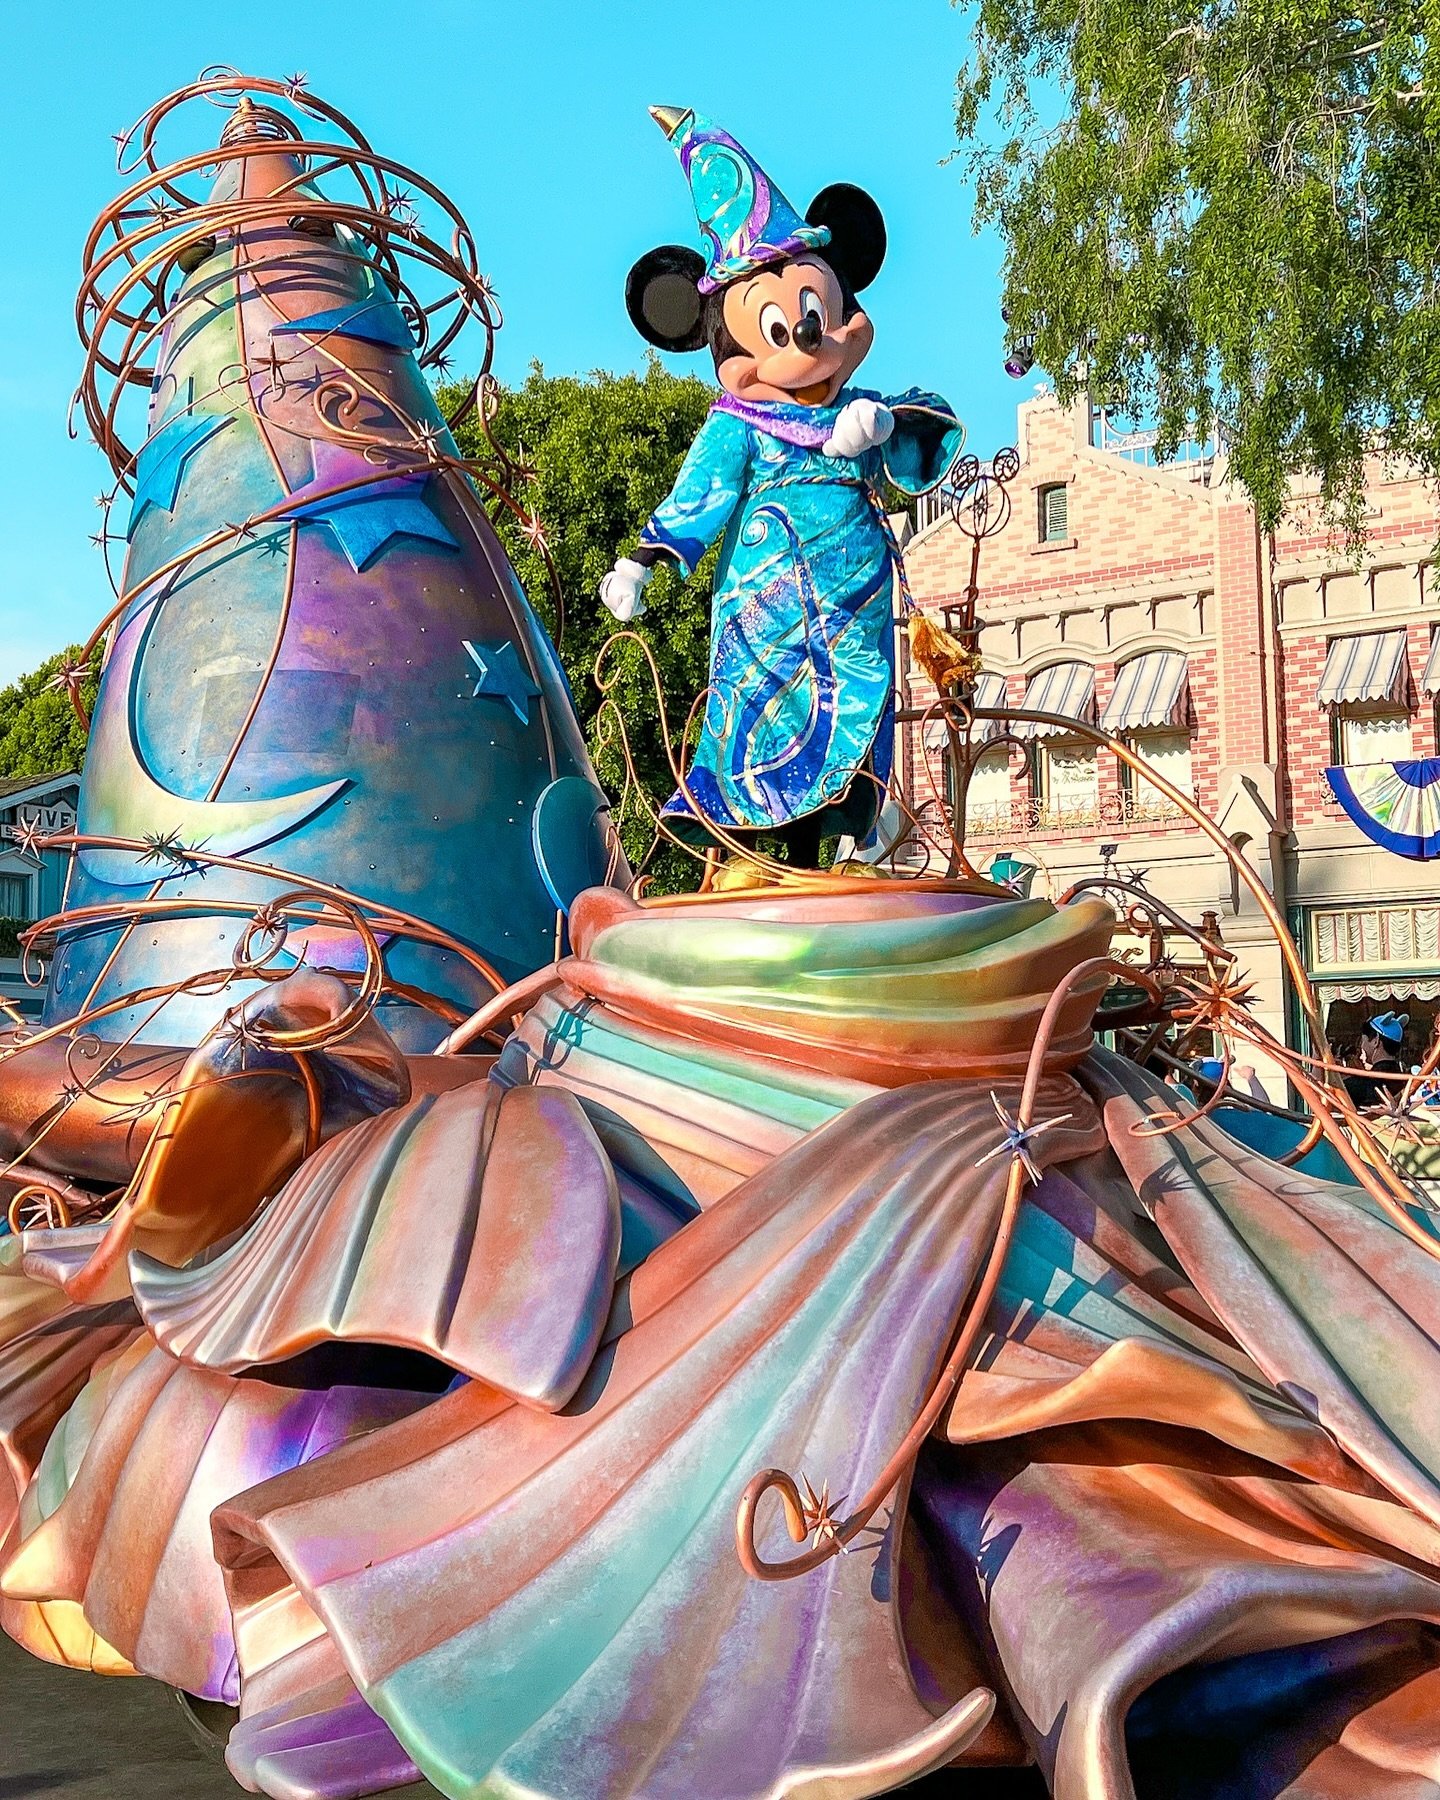 ✨QUESTION OF THE DAY👇🏼✨

If you could only watch one Disneyland parade for the rest of your life? What would it be? ☺️ 

Let us know in the comments!! 

&bull;
&bull;

#disneyland #disneylandresort #magichappensparade #disneyig #instadisney #disney